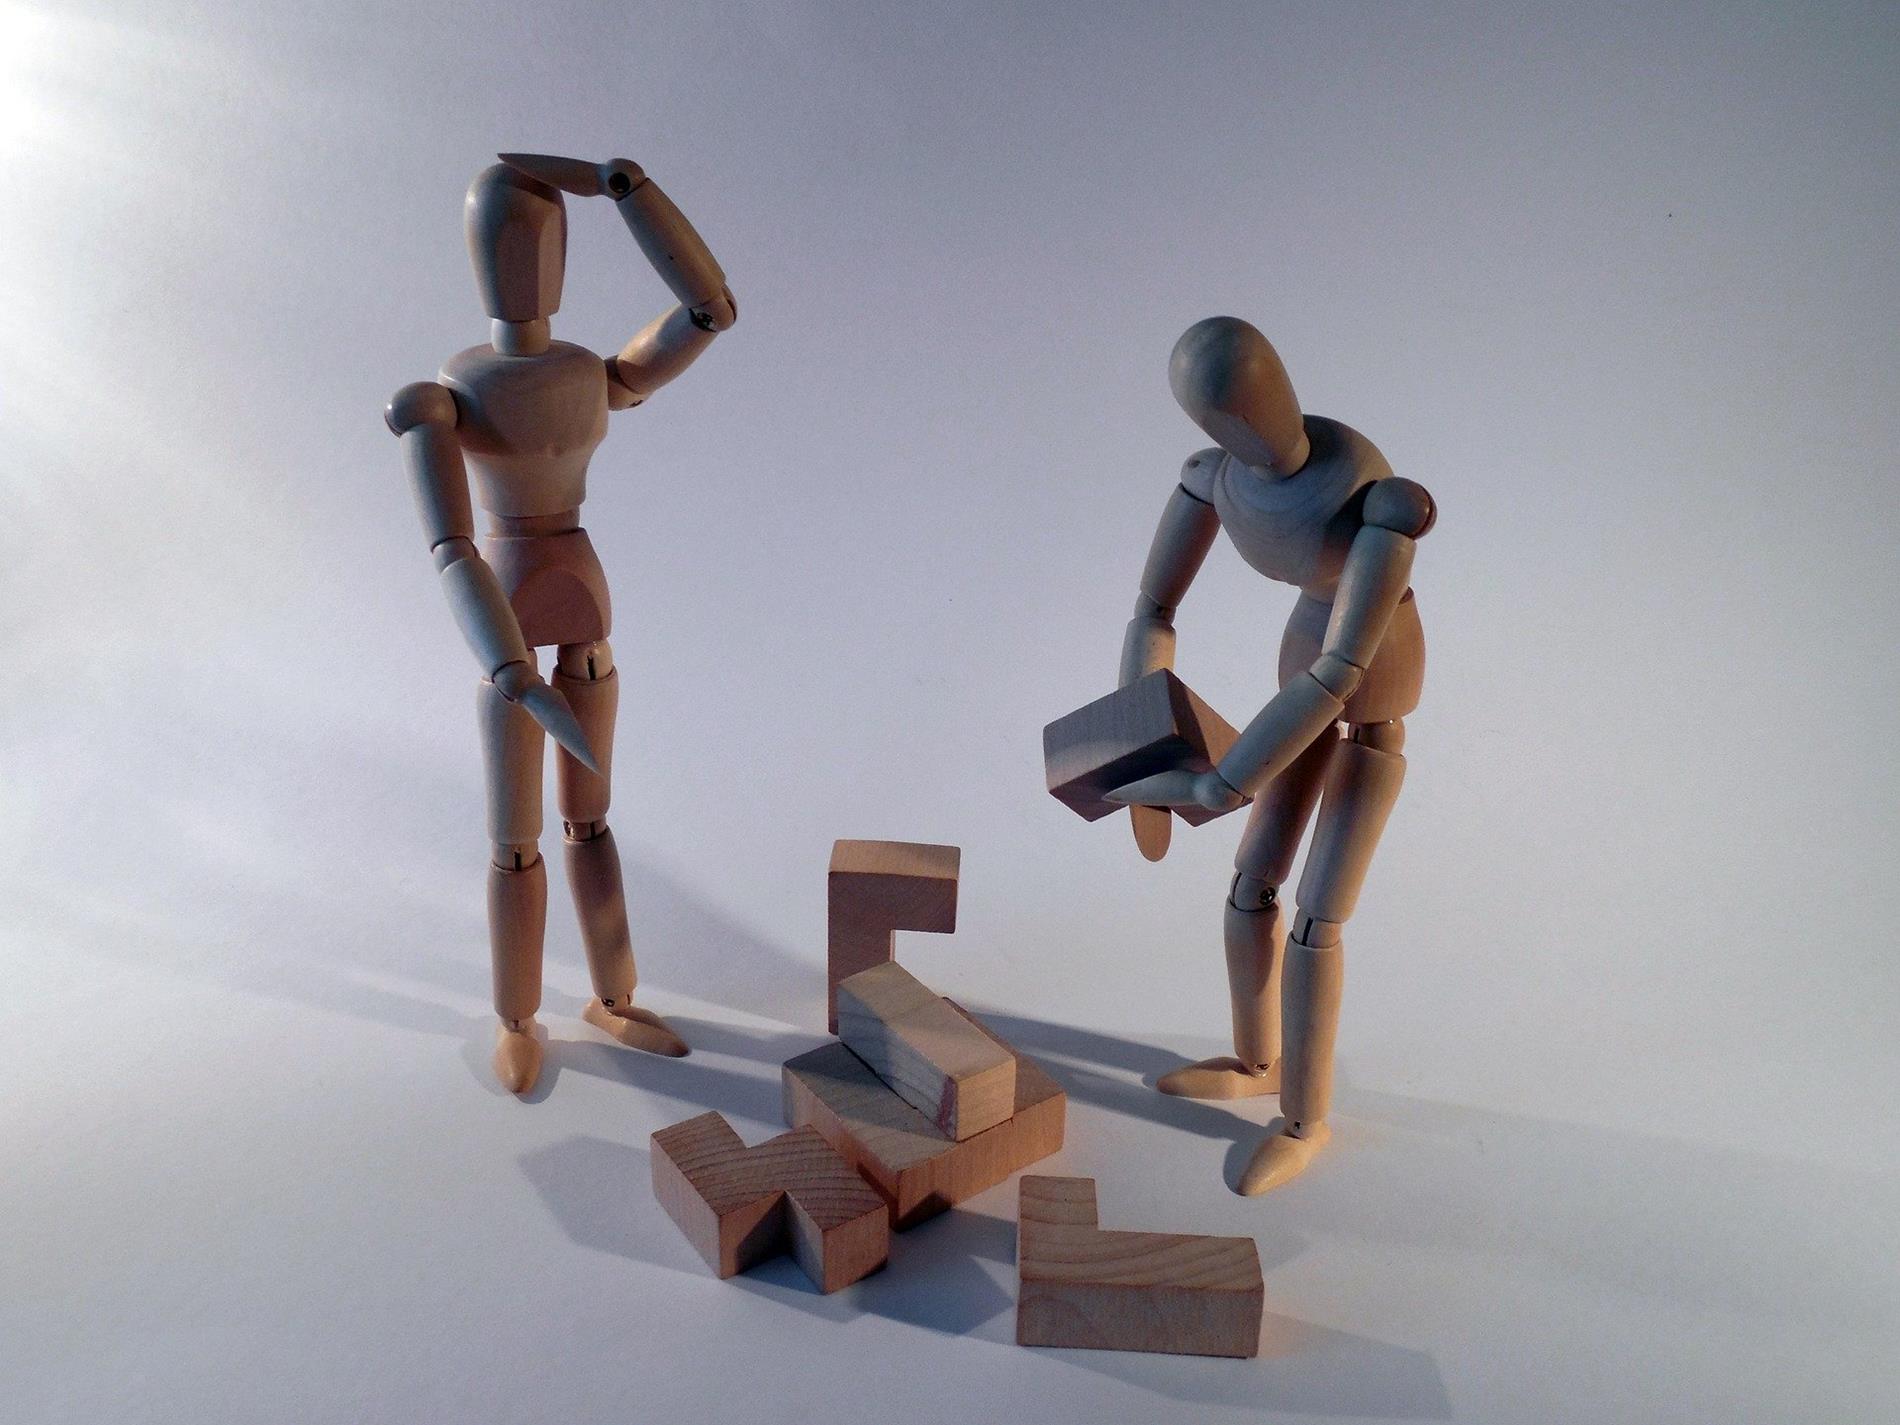 wooden human figures trying to solve a wooden puzzle